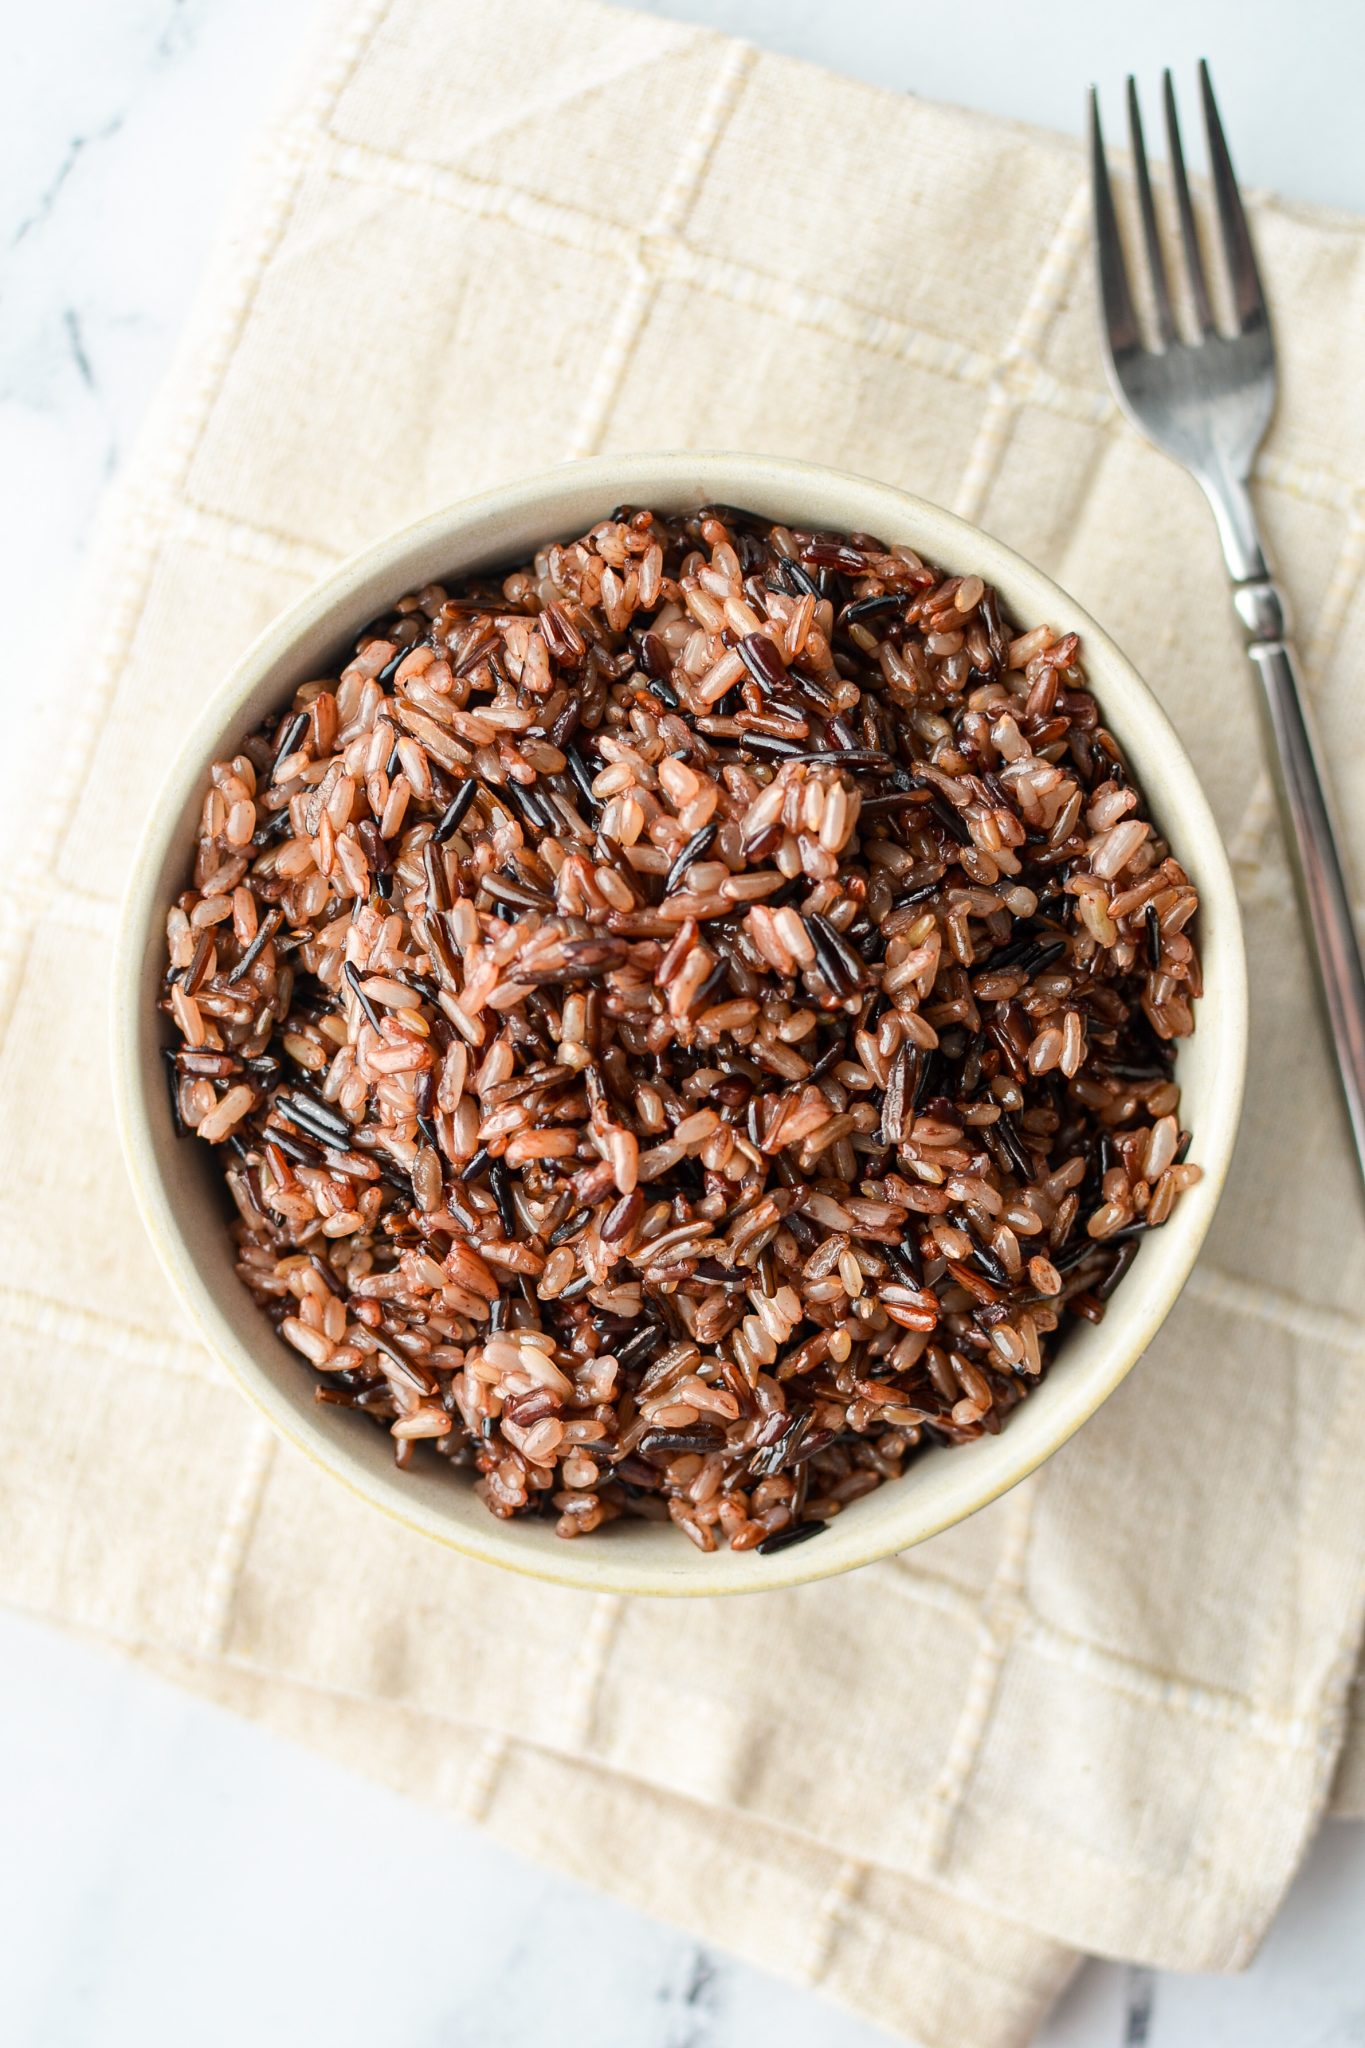 A bowl of wild rice on an off white cloth.